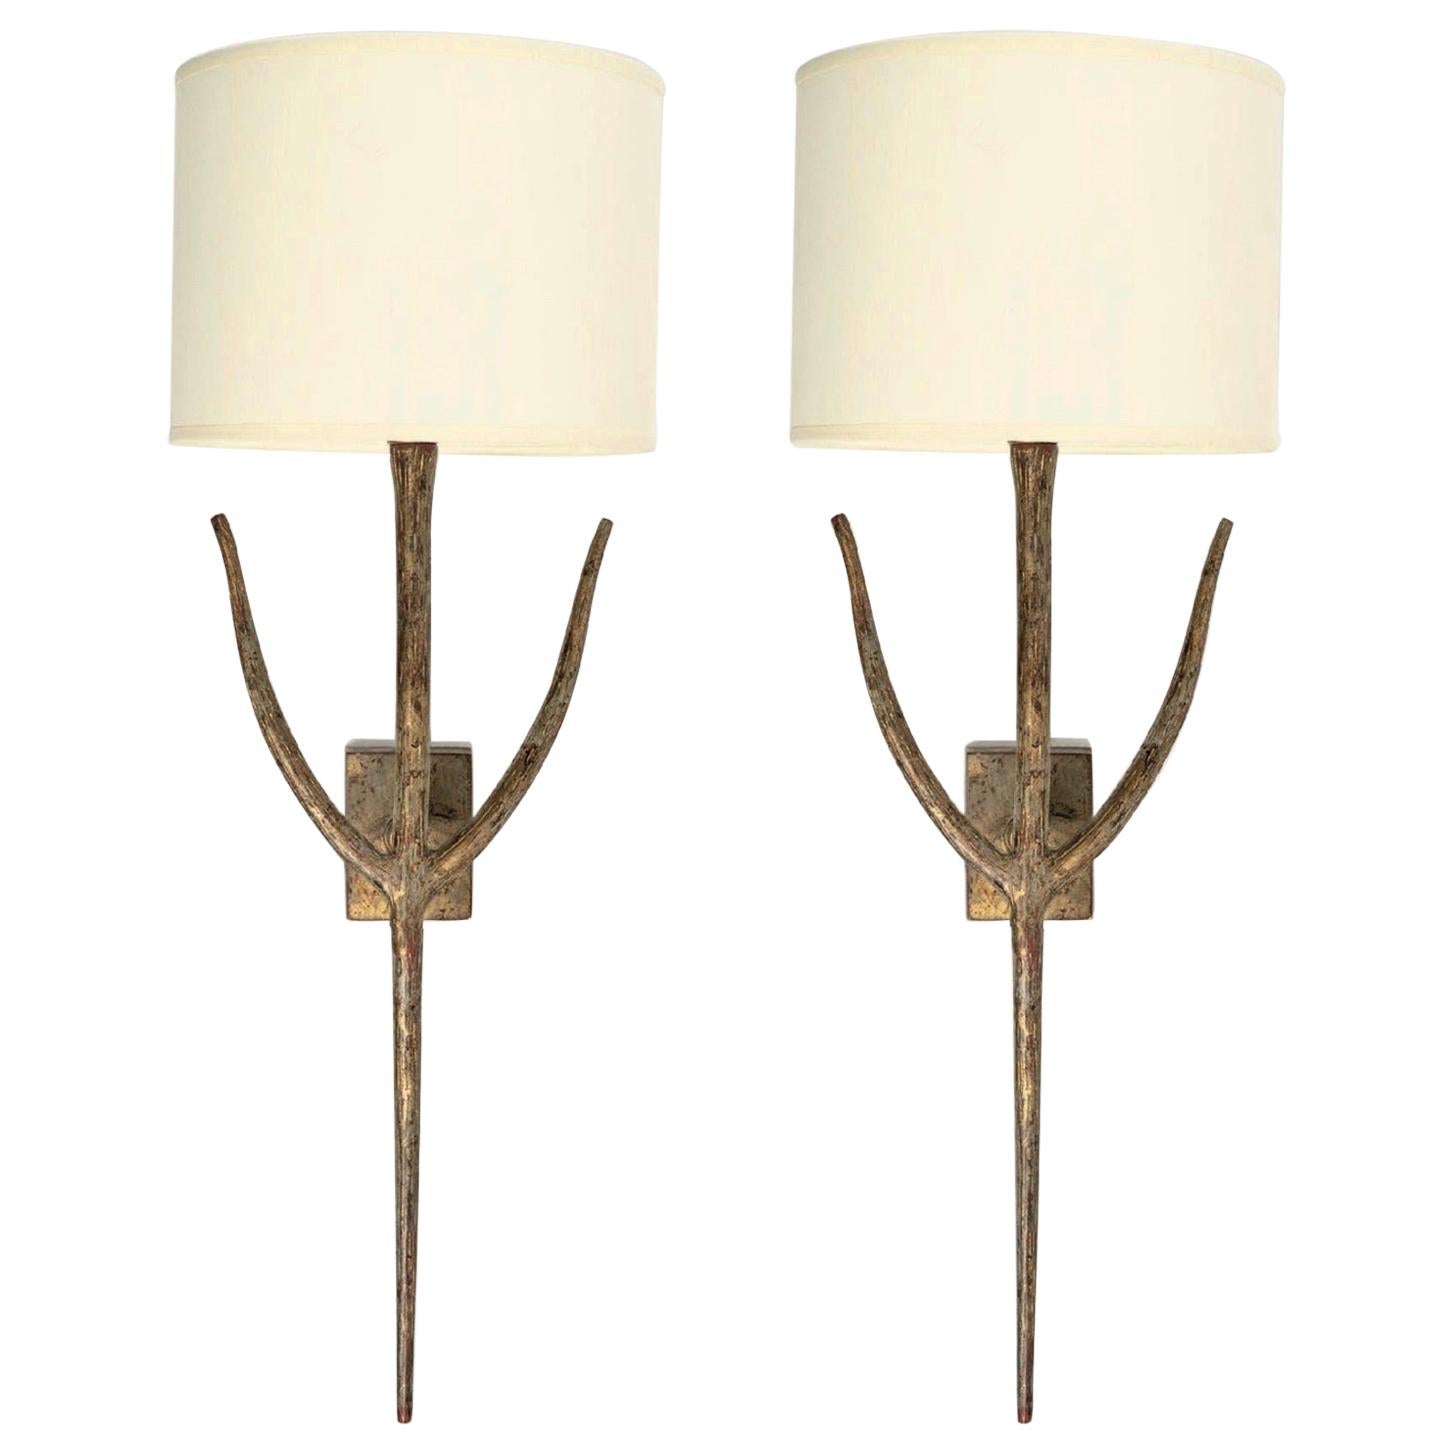 Large Pair of Bronze Wall Lights by Franco Lapini for Porta Romana 1980